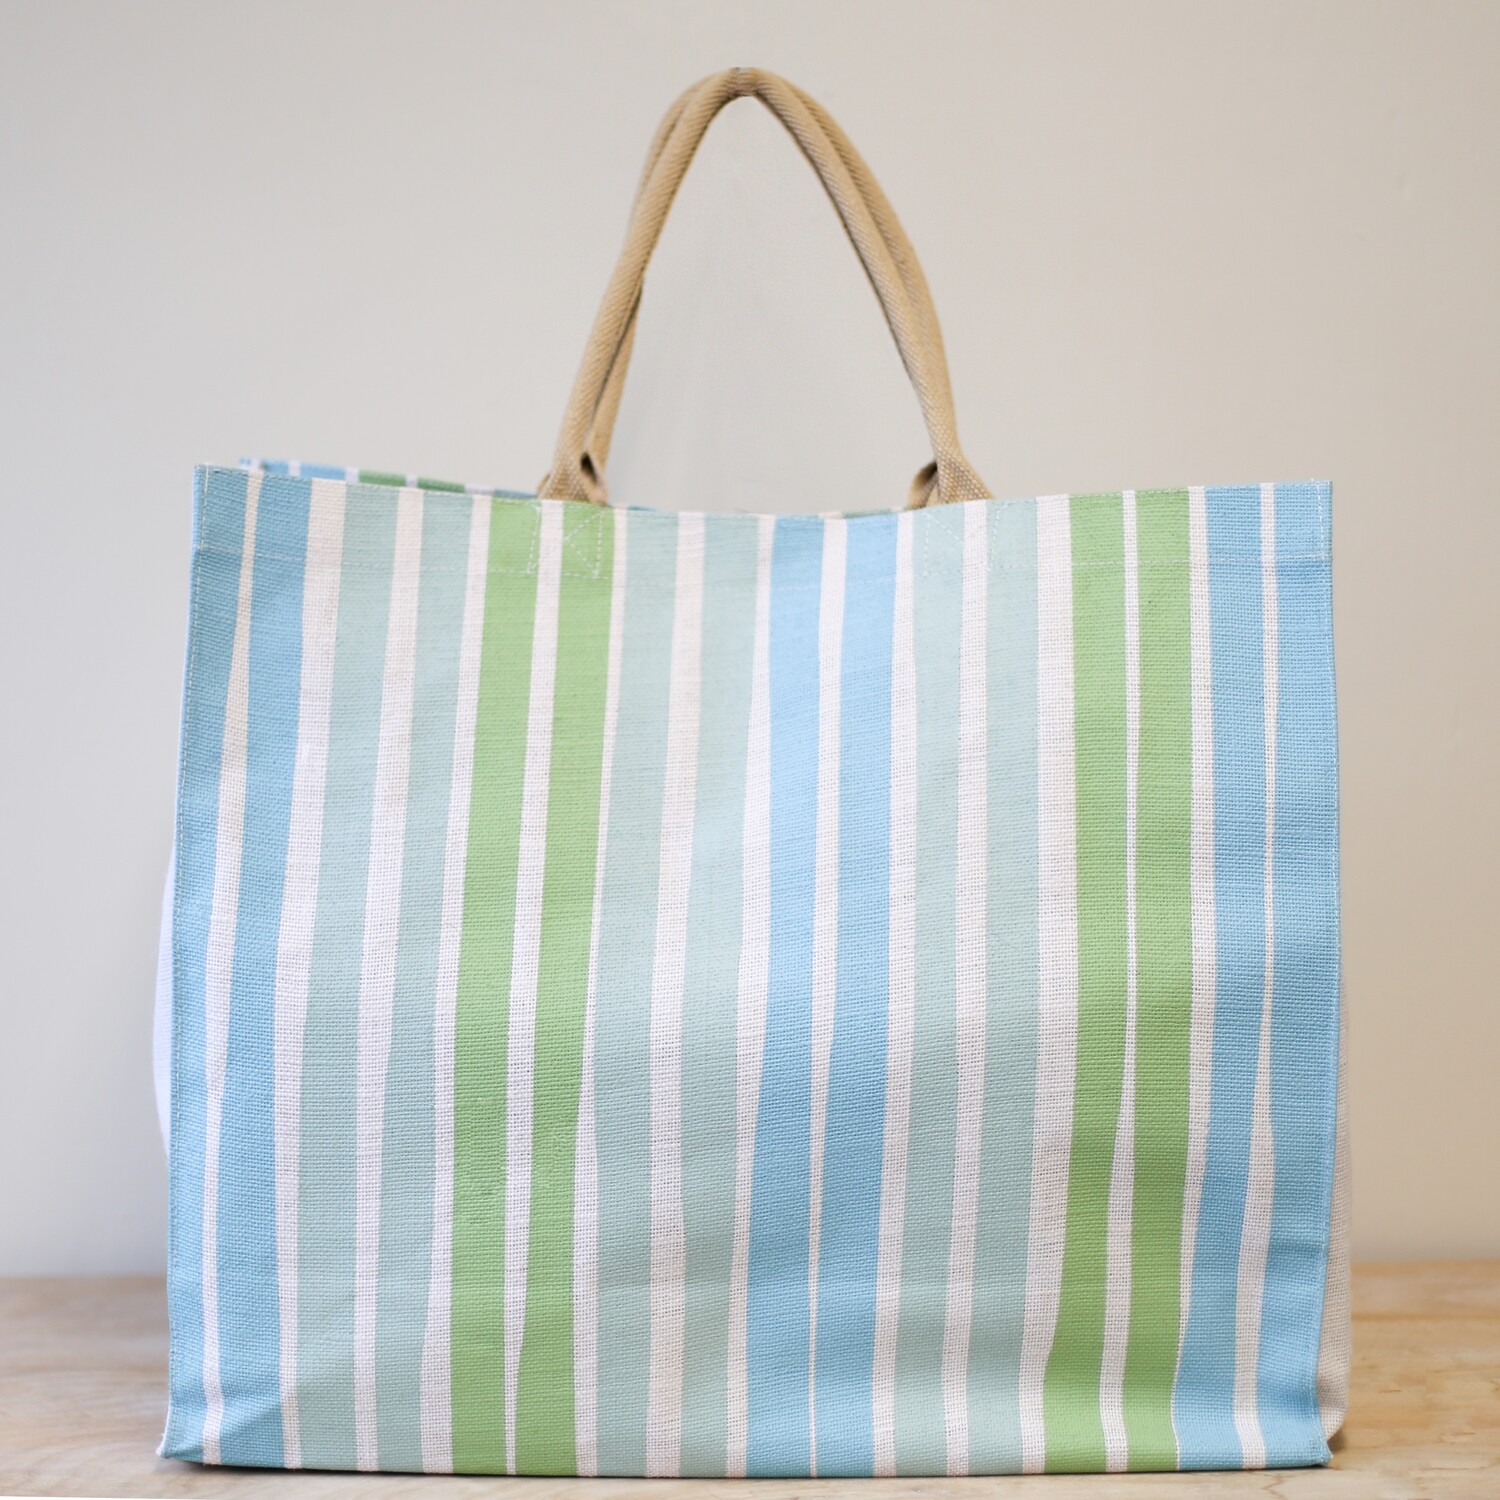 Aruba Carryall Tote in Turquoise/ Pastel Green